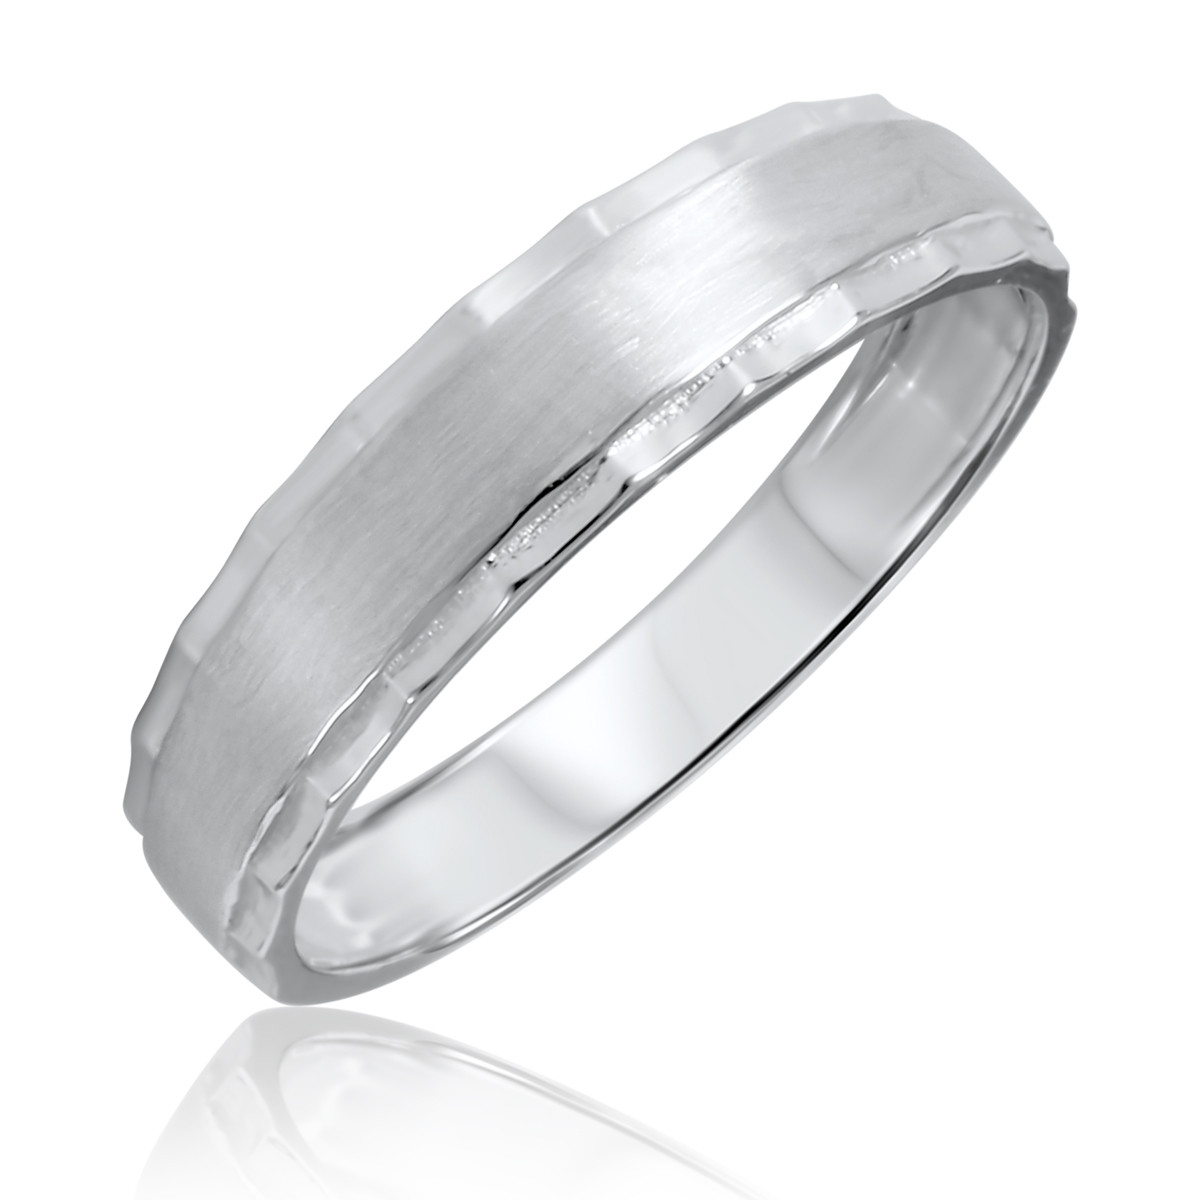 Mens Wedding Band White Gold
 Traditional Mens Wedding Band 10K White Gold